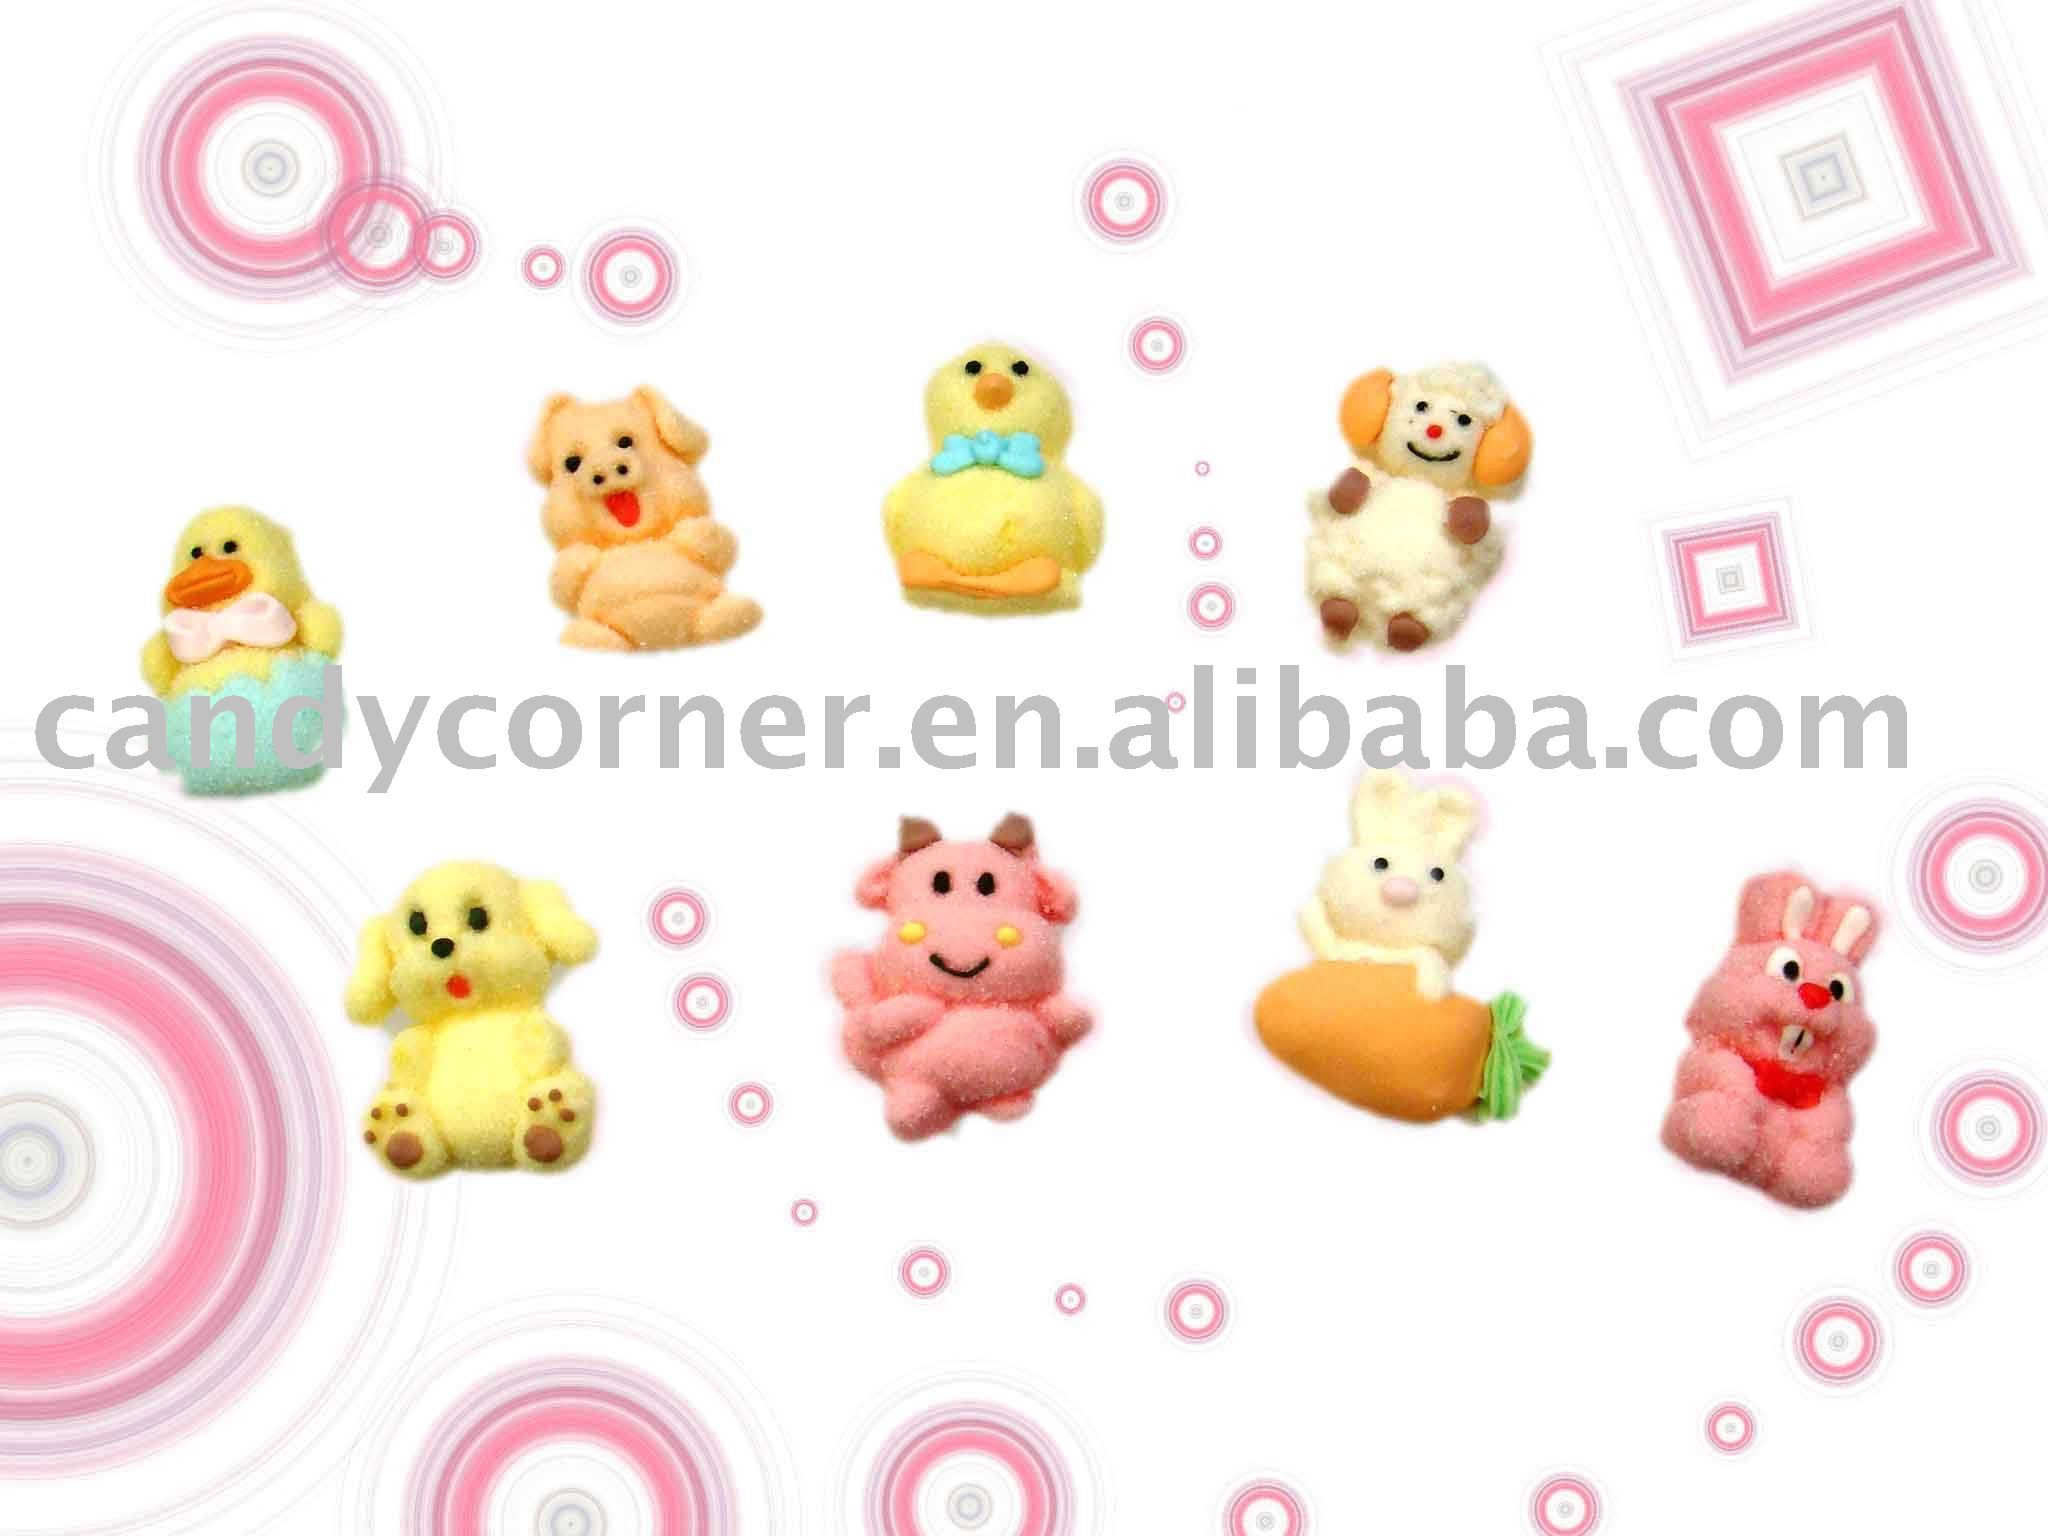 sweet animal cotton candy,China candy corner price supplier - 21food